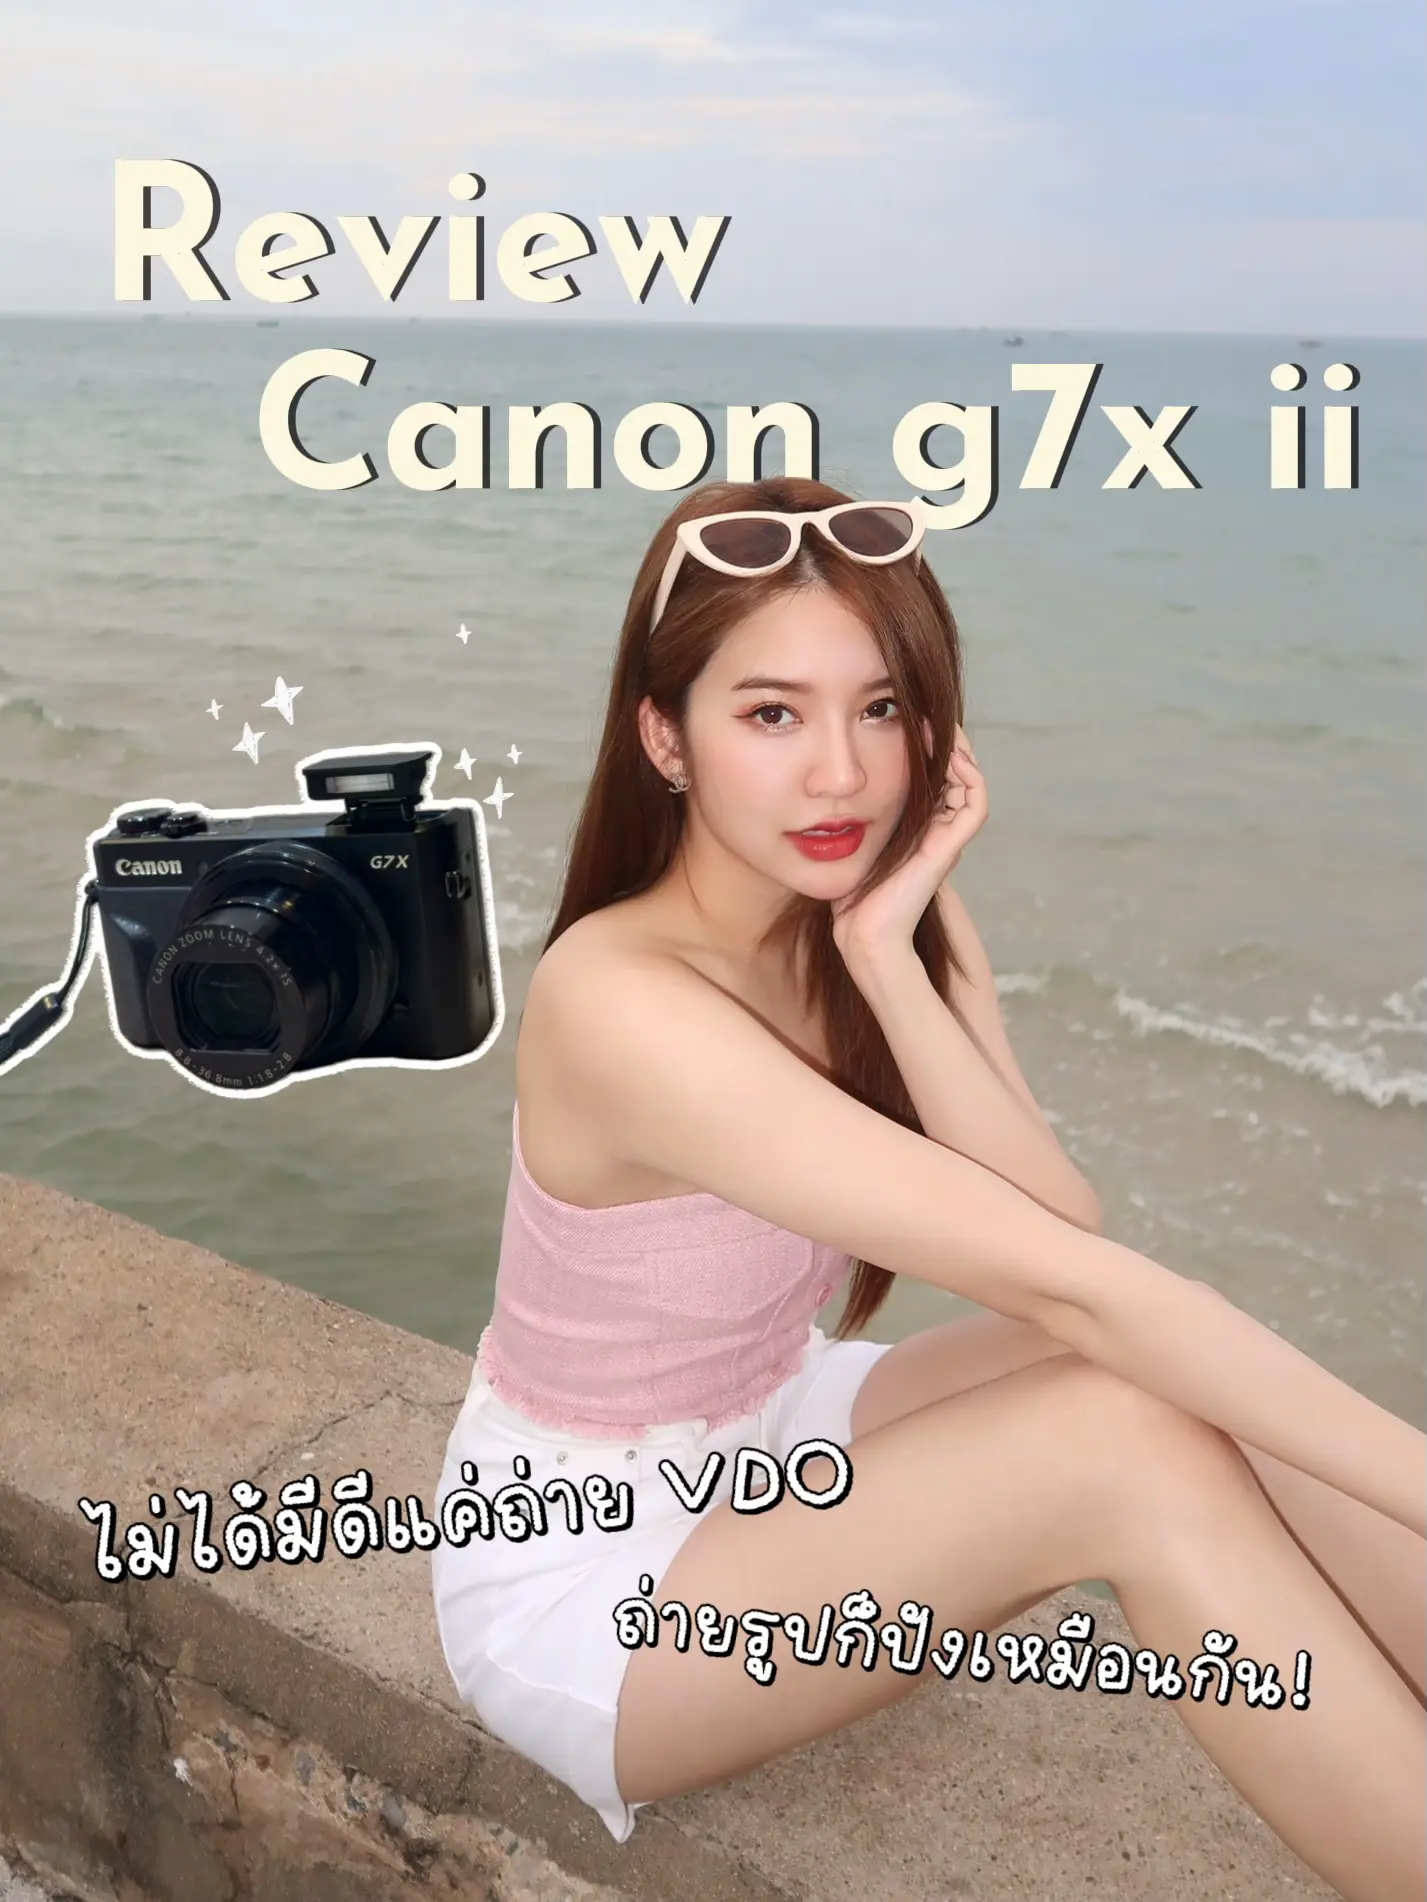 Review Canon g7x ii. Take a picture is bang. 📸, Gallery posted by PATCY